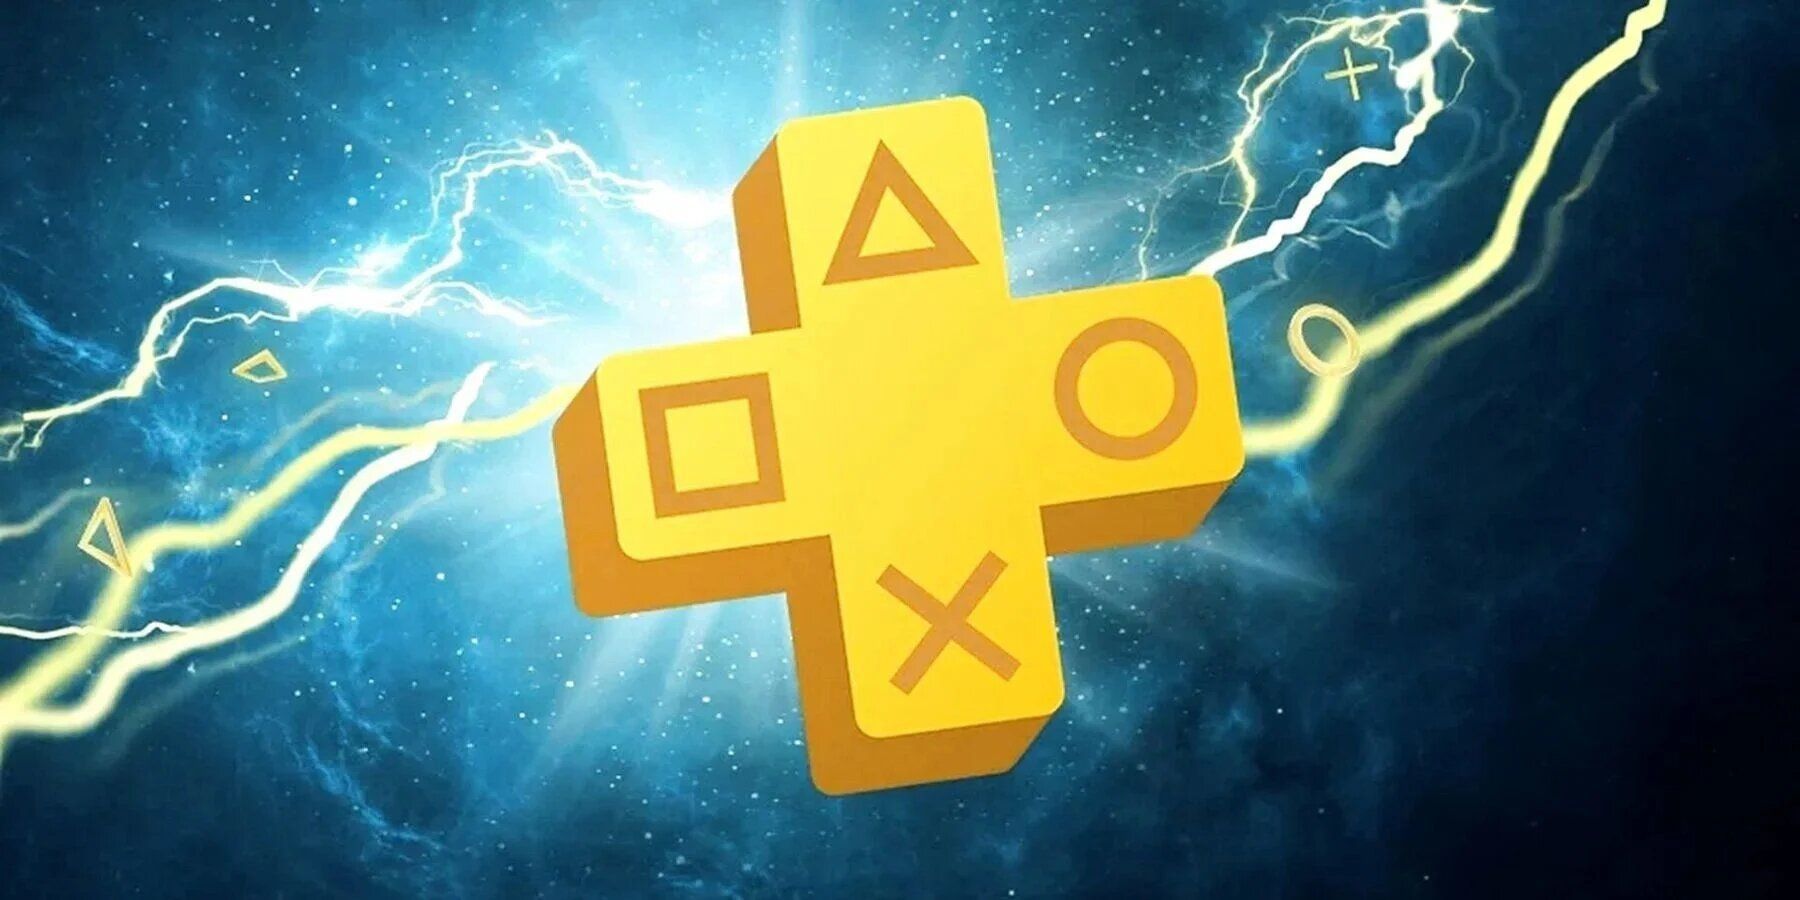 PlayStation Plus Extra and Premium games for April 2023 announced - Polygon